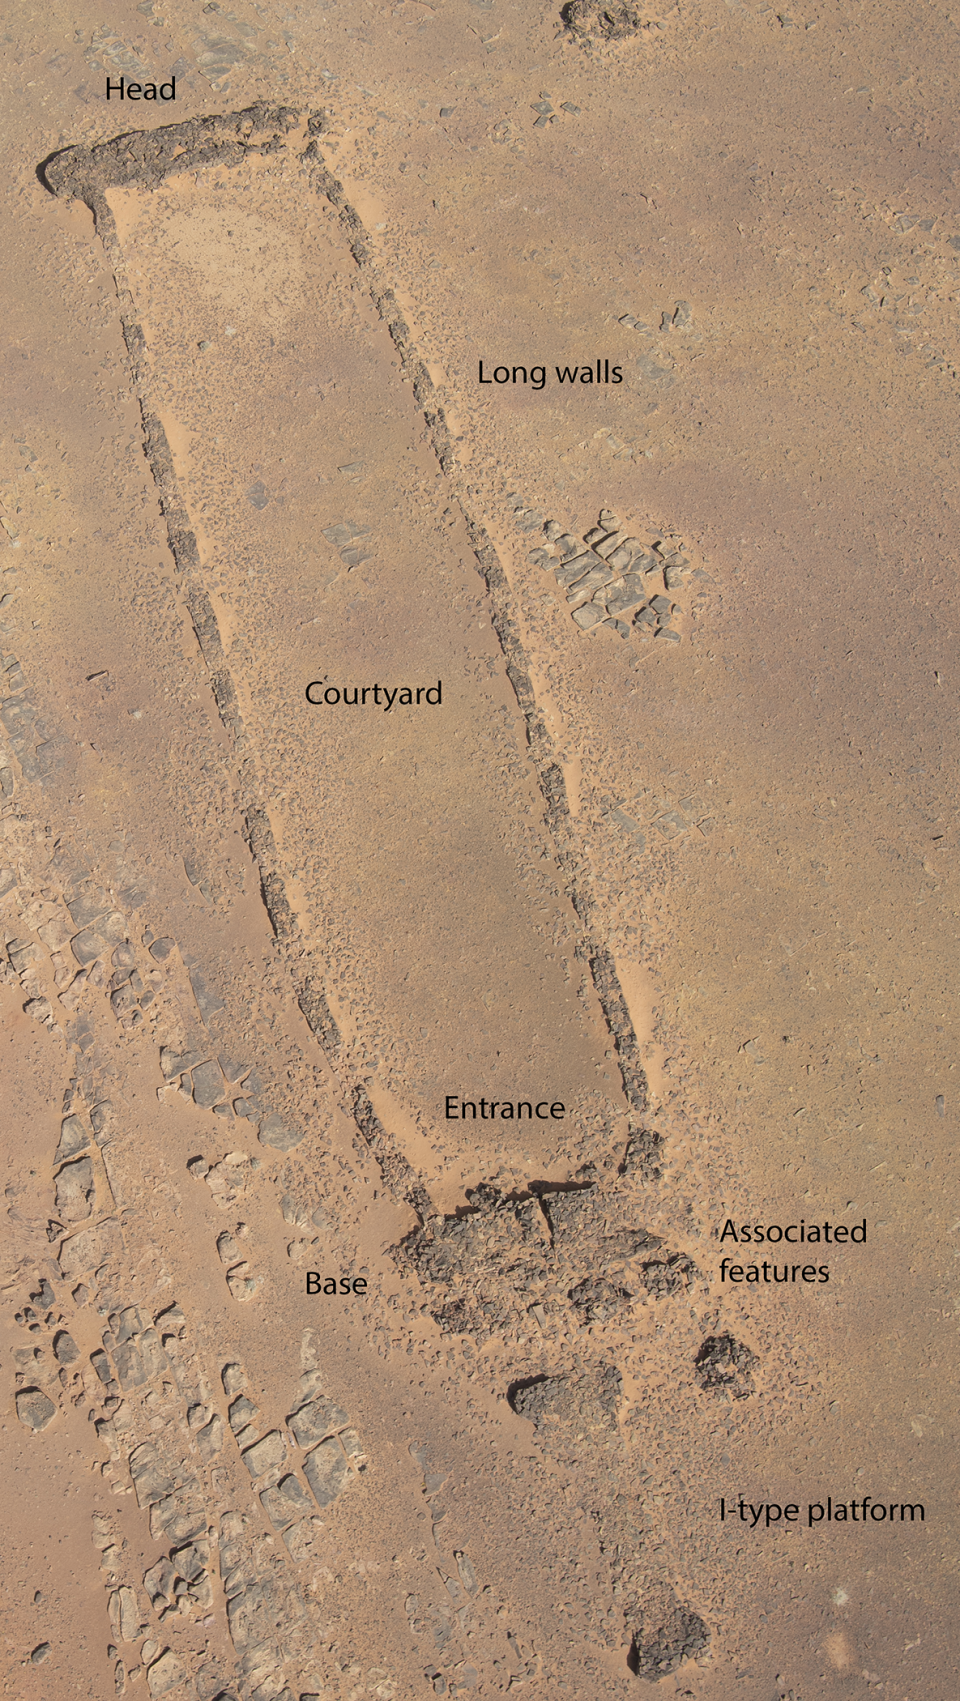 An annotated image of the mustatil excavated by the researchers.